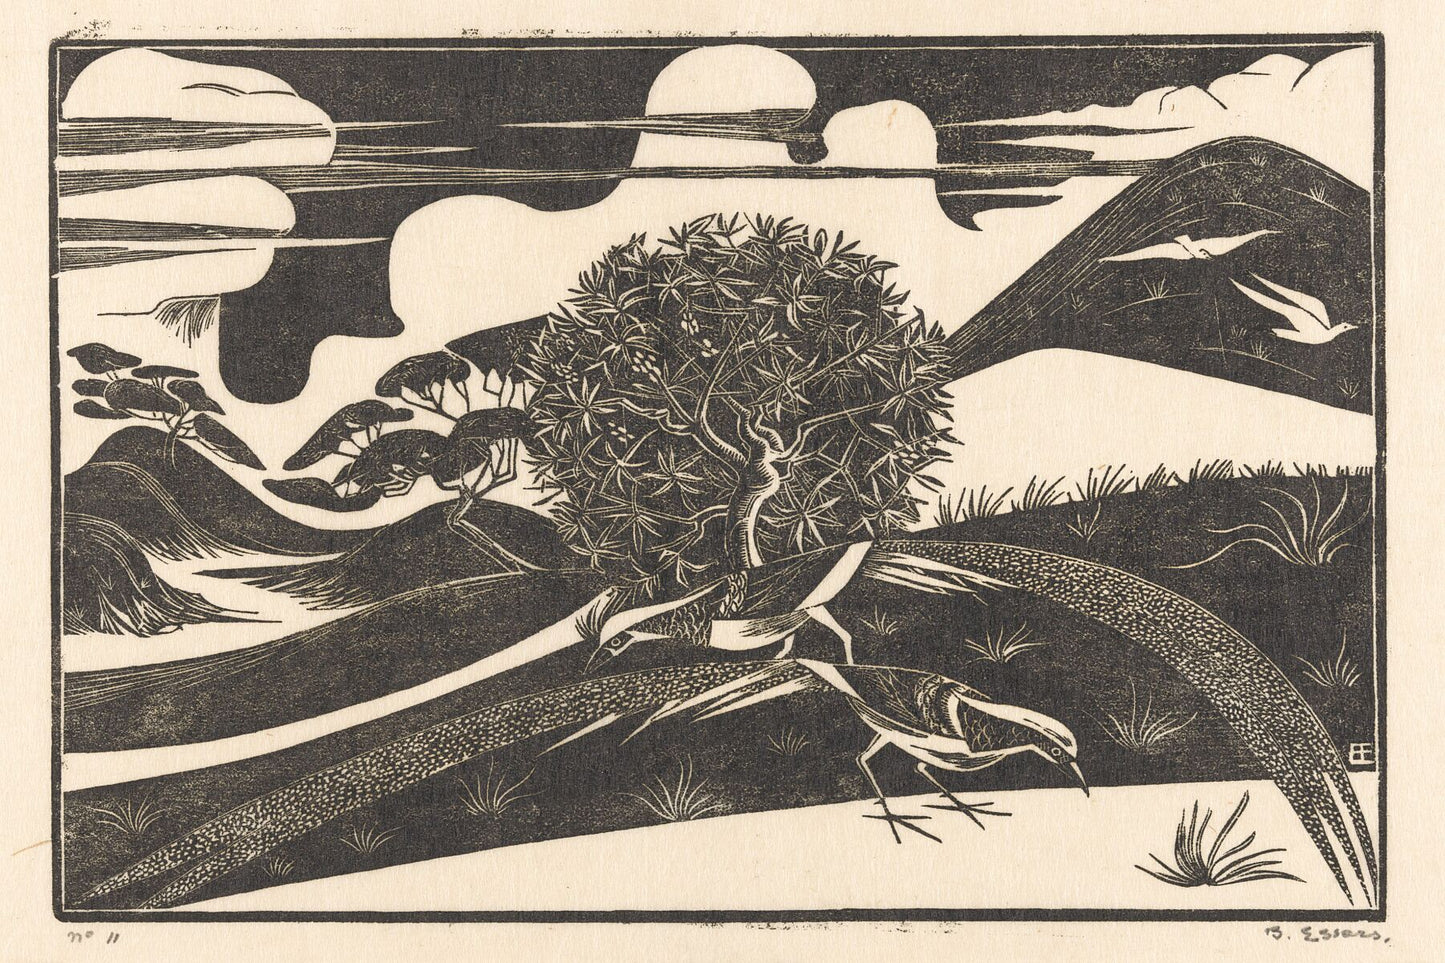 Two Pheasants in a Hilly Landscape by Bernard Essers - c. 1925